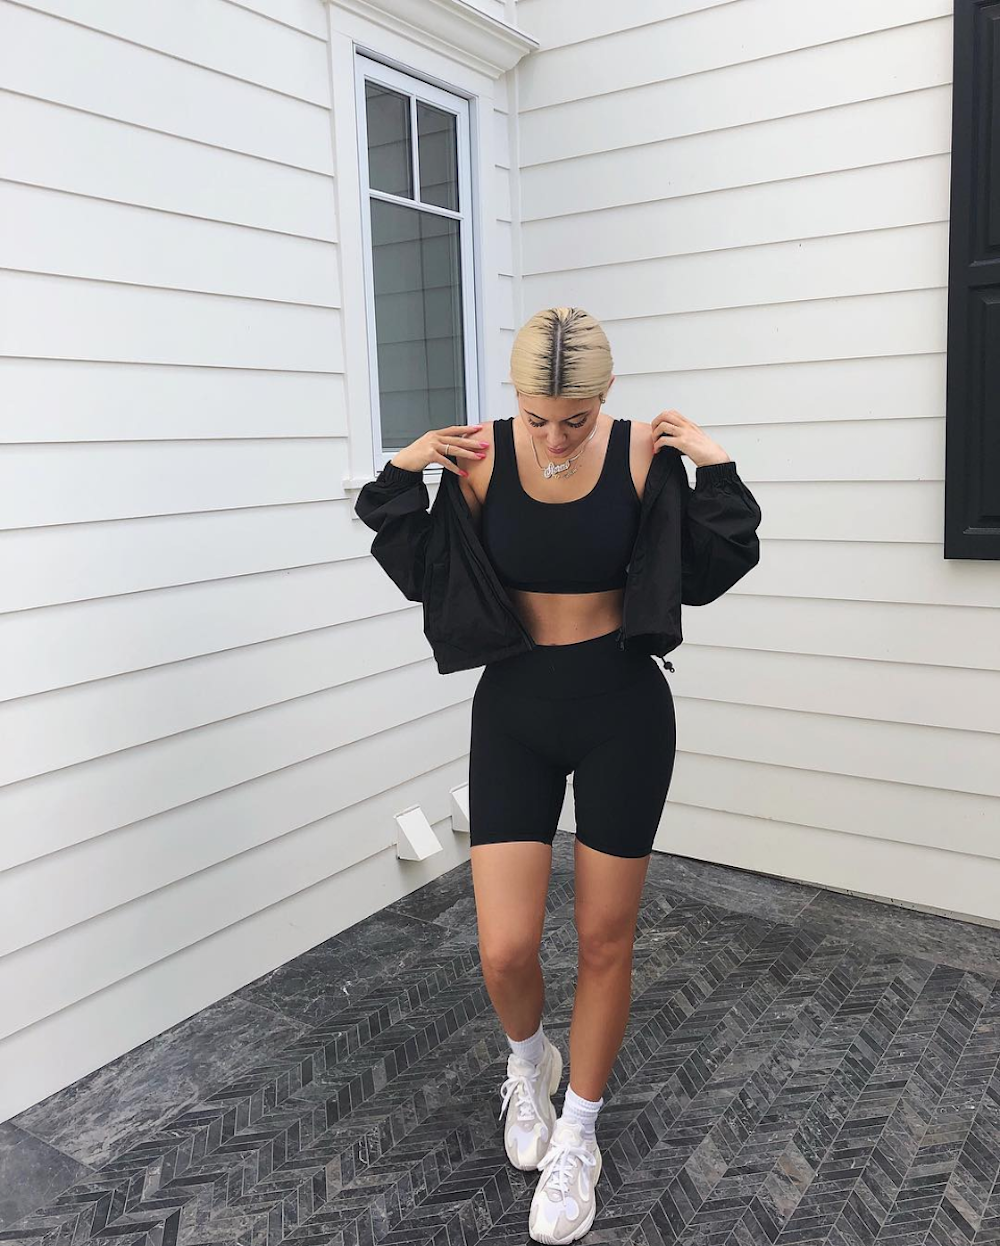 kylie jenner white sneakers 2019